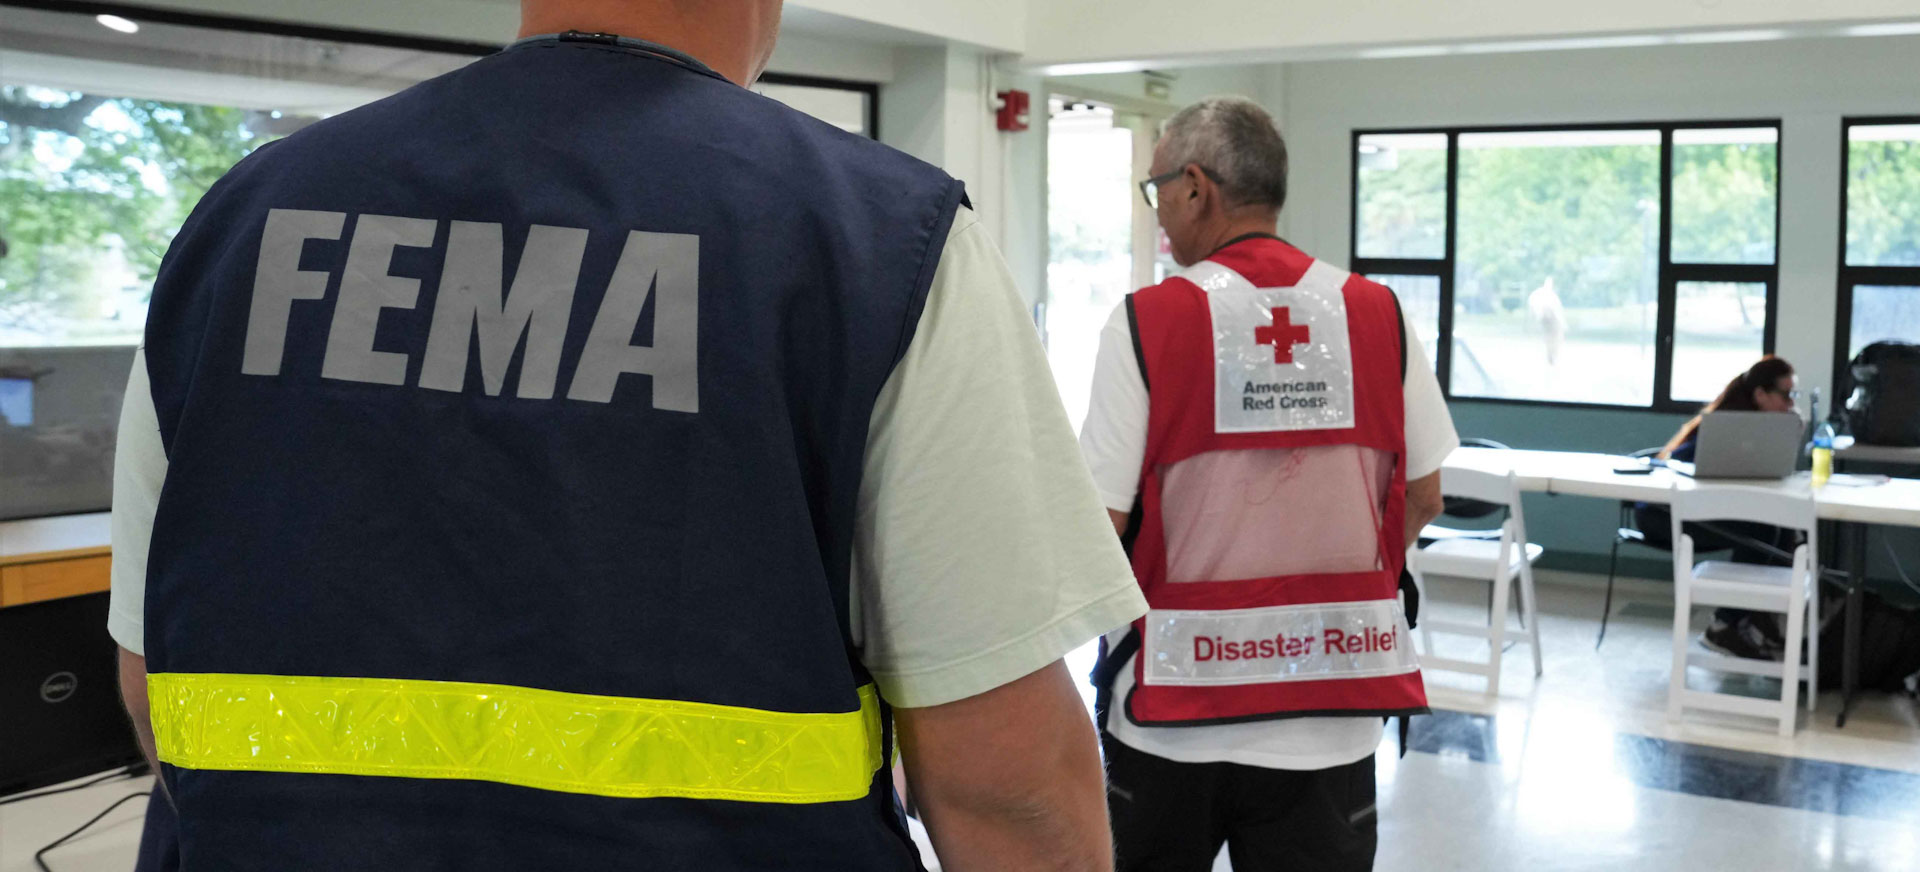 FEMA employee and American Red Cross volunteer stand next to each other. 